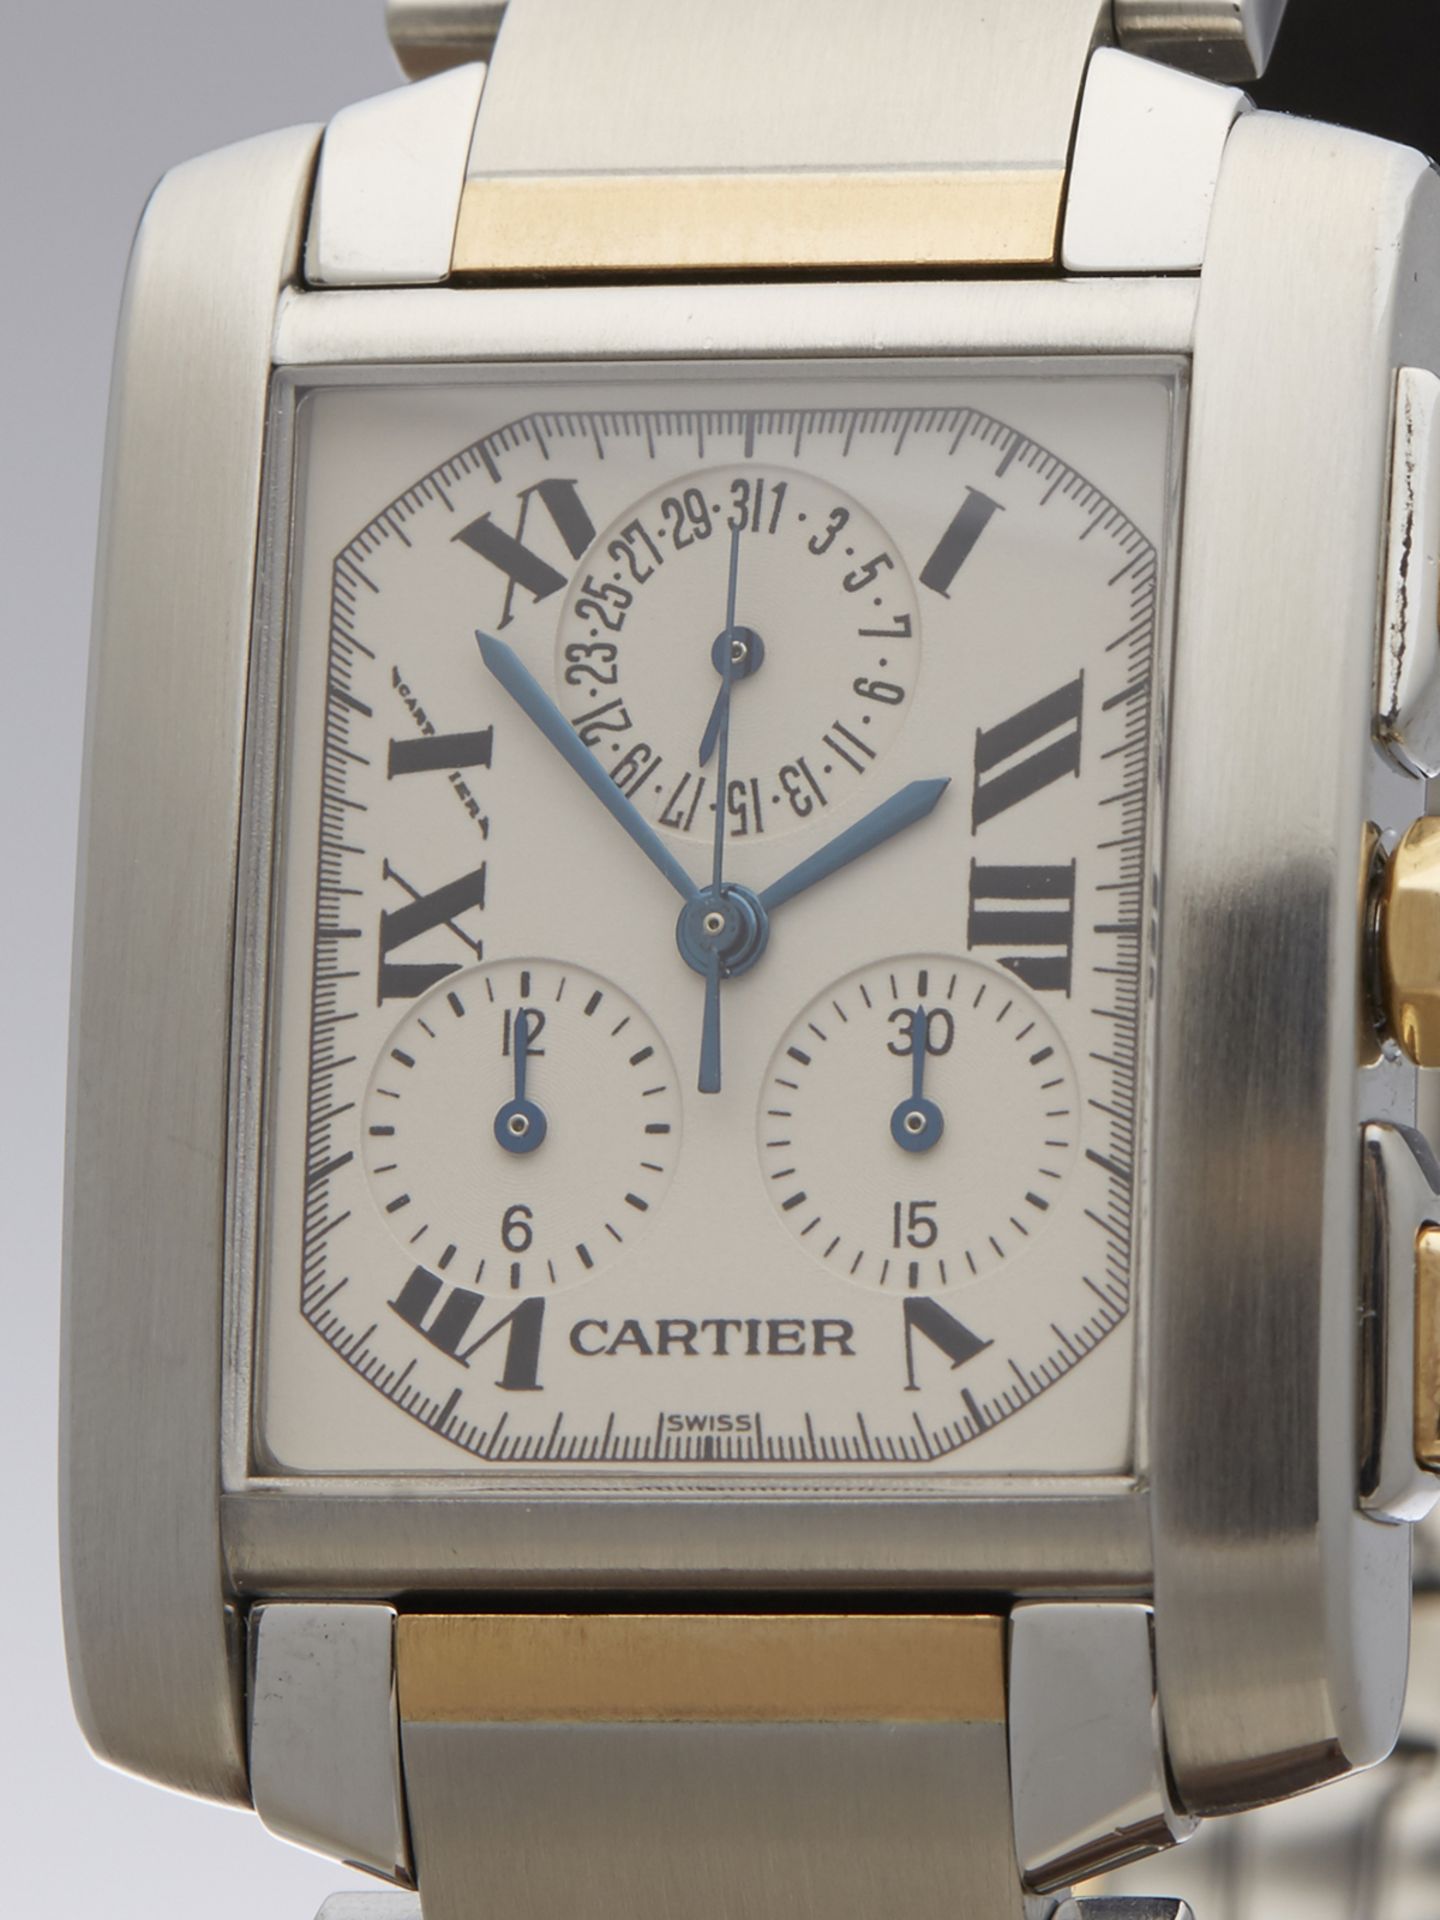 Cartier Tank Francaise Chronoreflex 28mm Stainless Steel & 18k Yellow Gold 2303 or W51004Q4